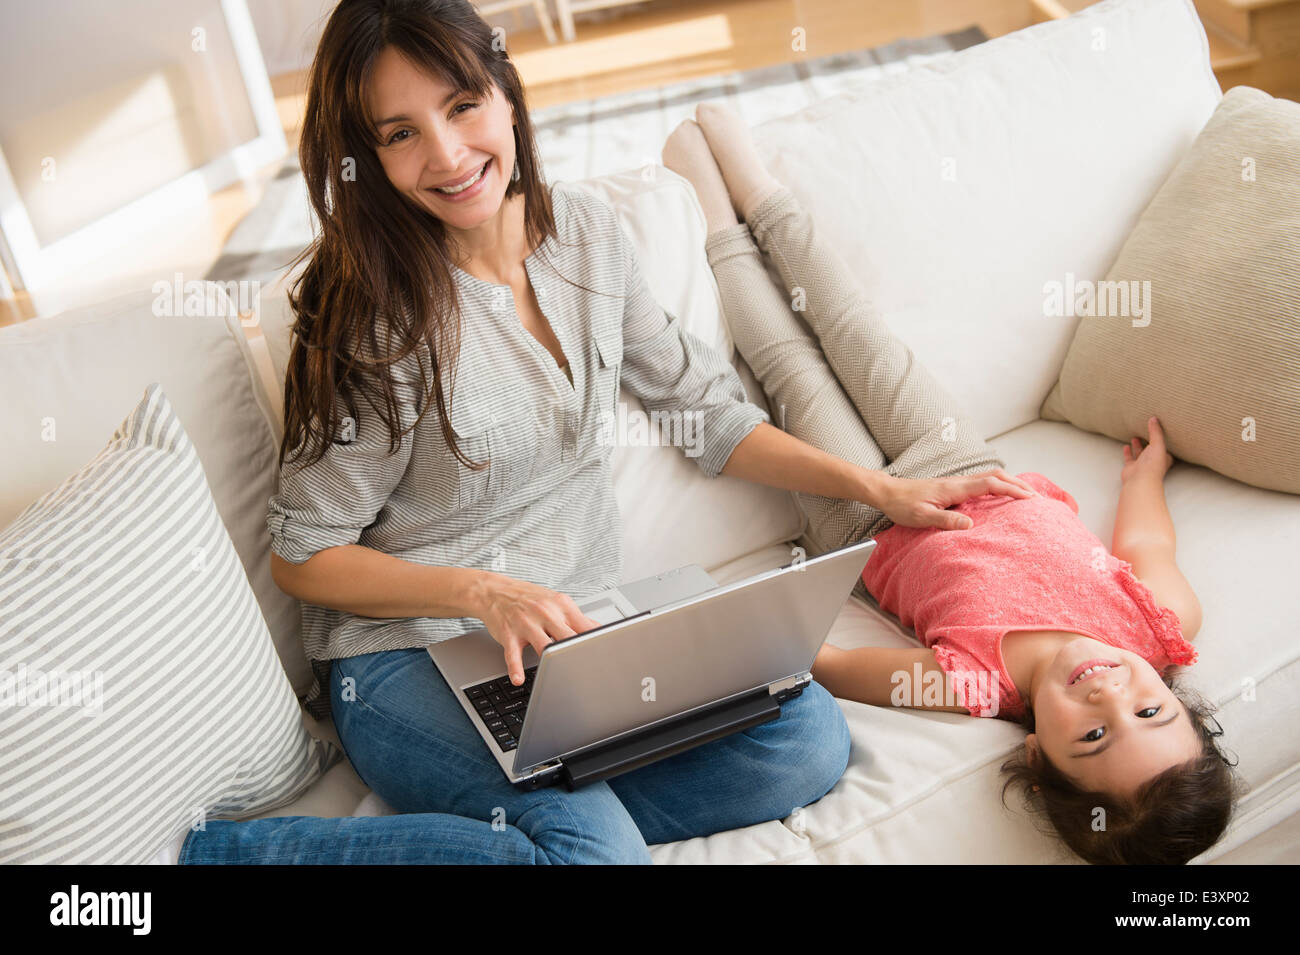 Hispanic mother and daughter relaxing on sofa Stock Photo